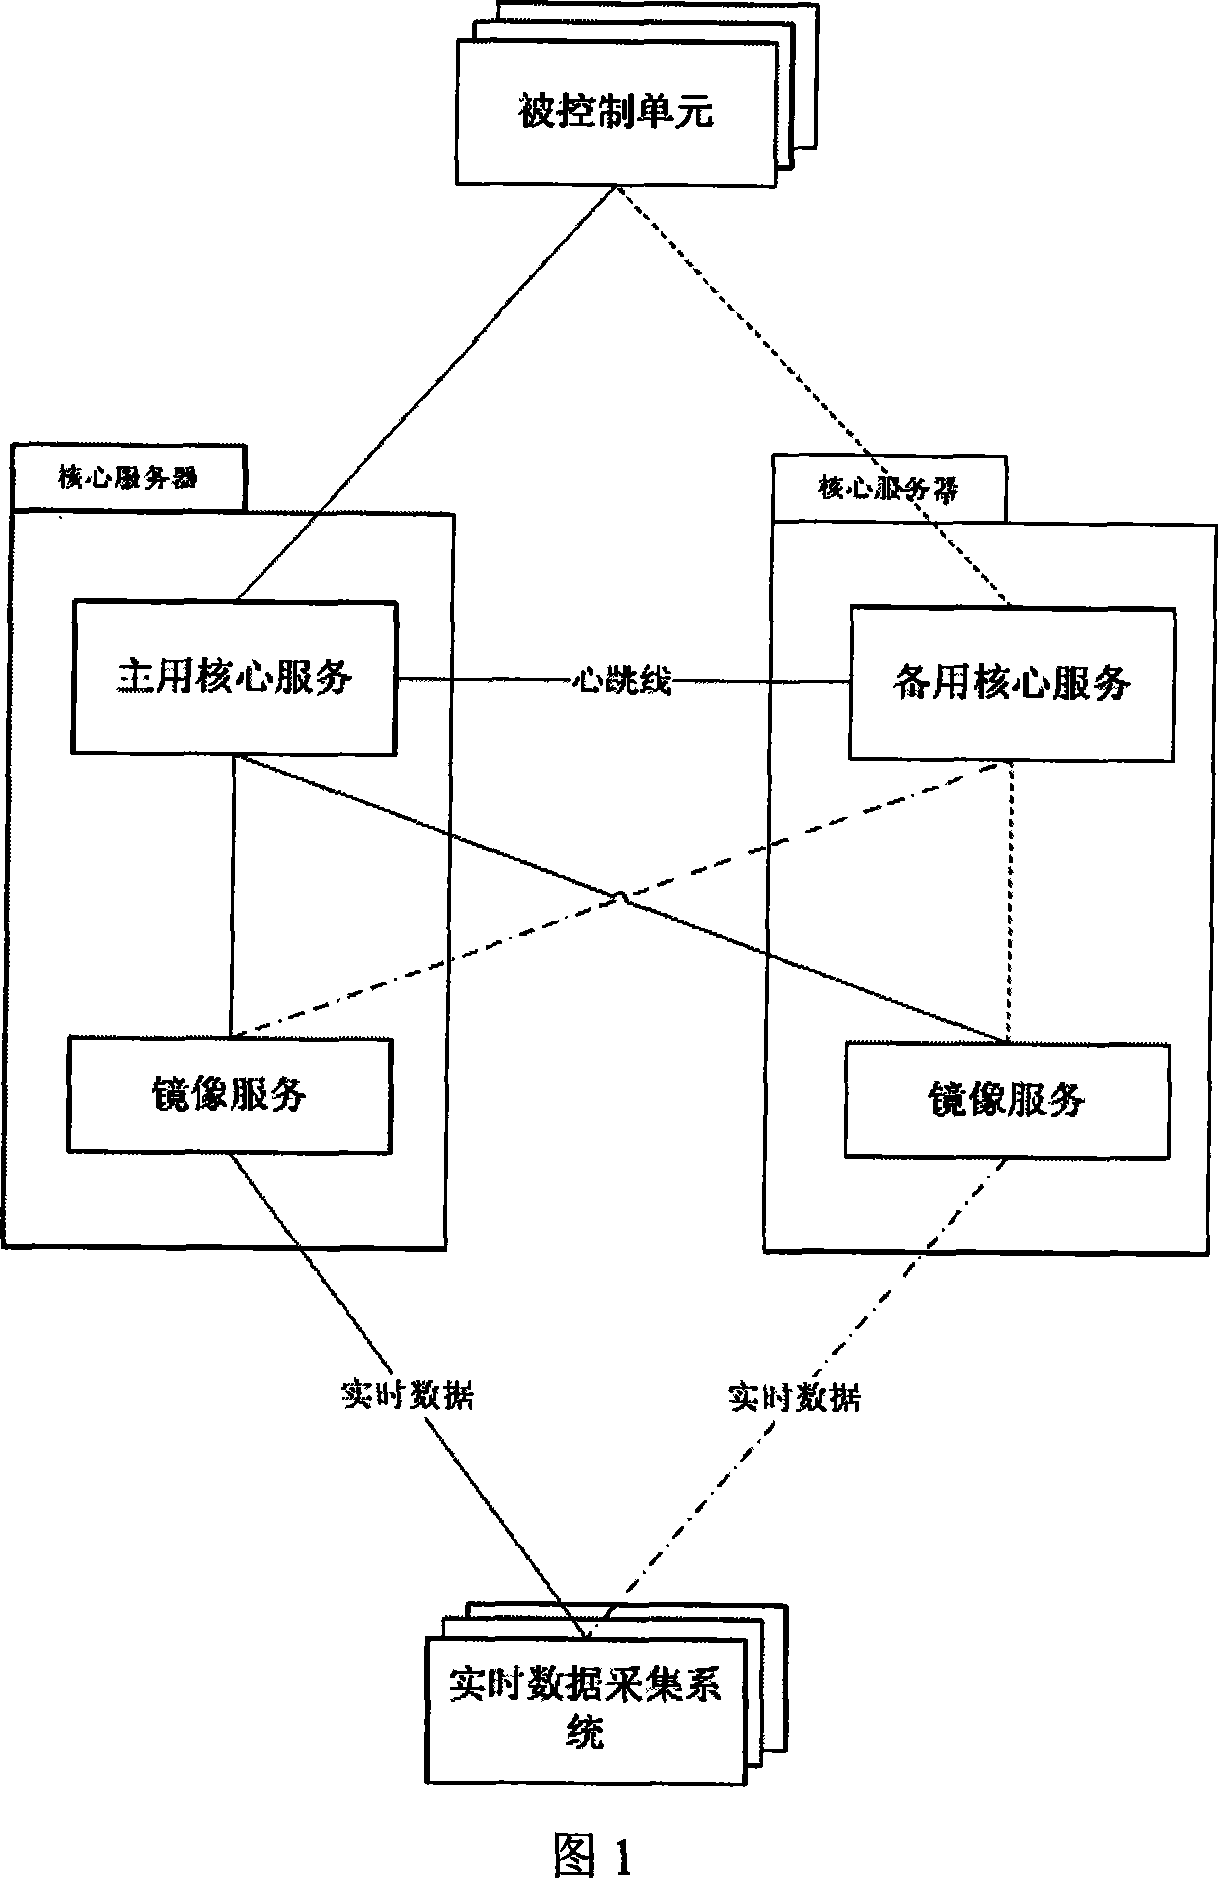 Image backup method for dual-core control of core controlled system